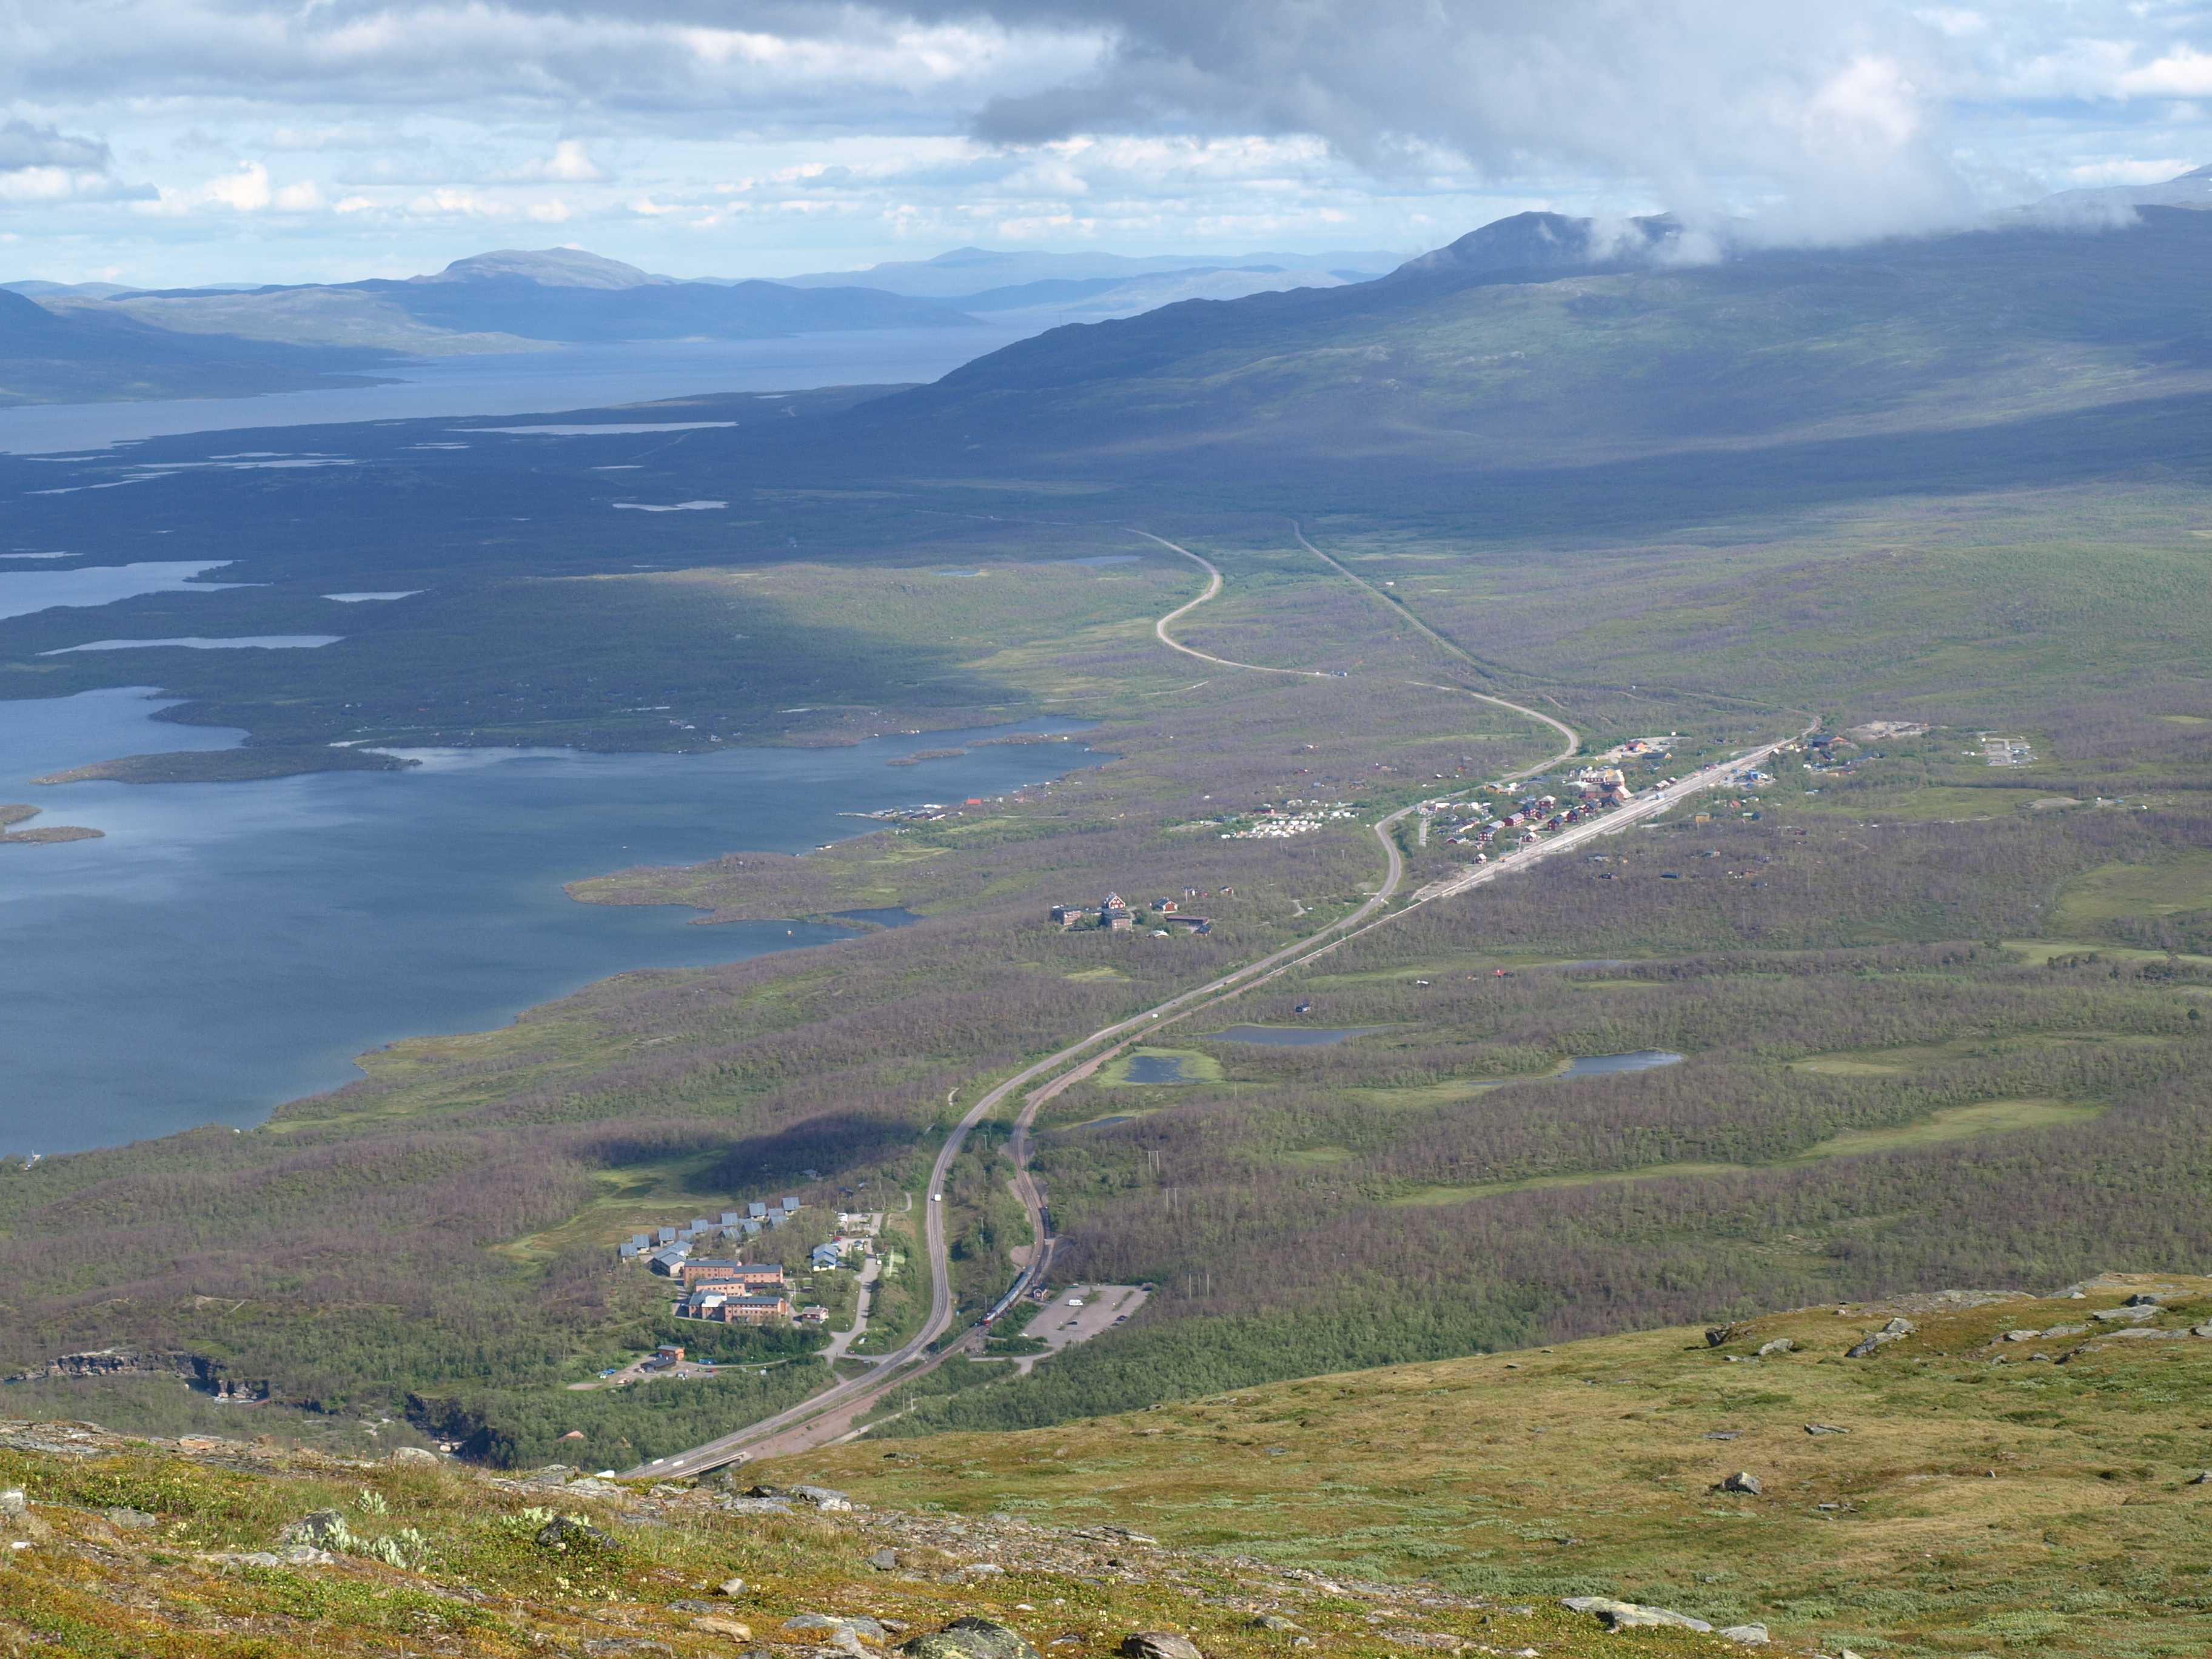 Overview of Abisko in the background, showing a vast landscape from above with forests in the foreground and mountains in the background